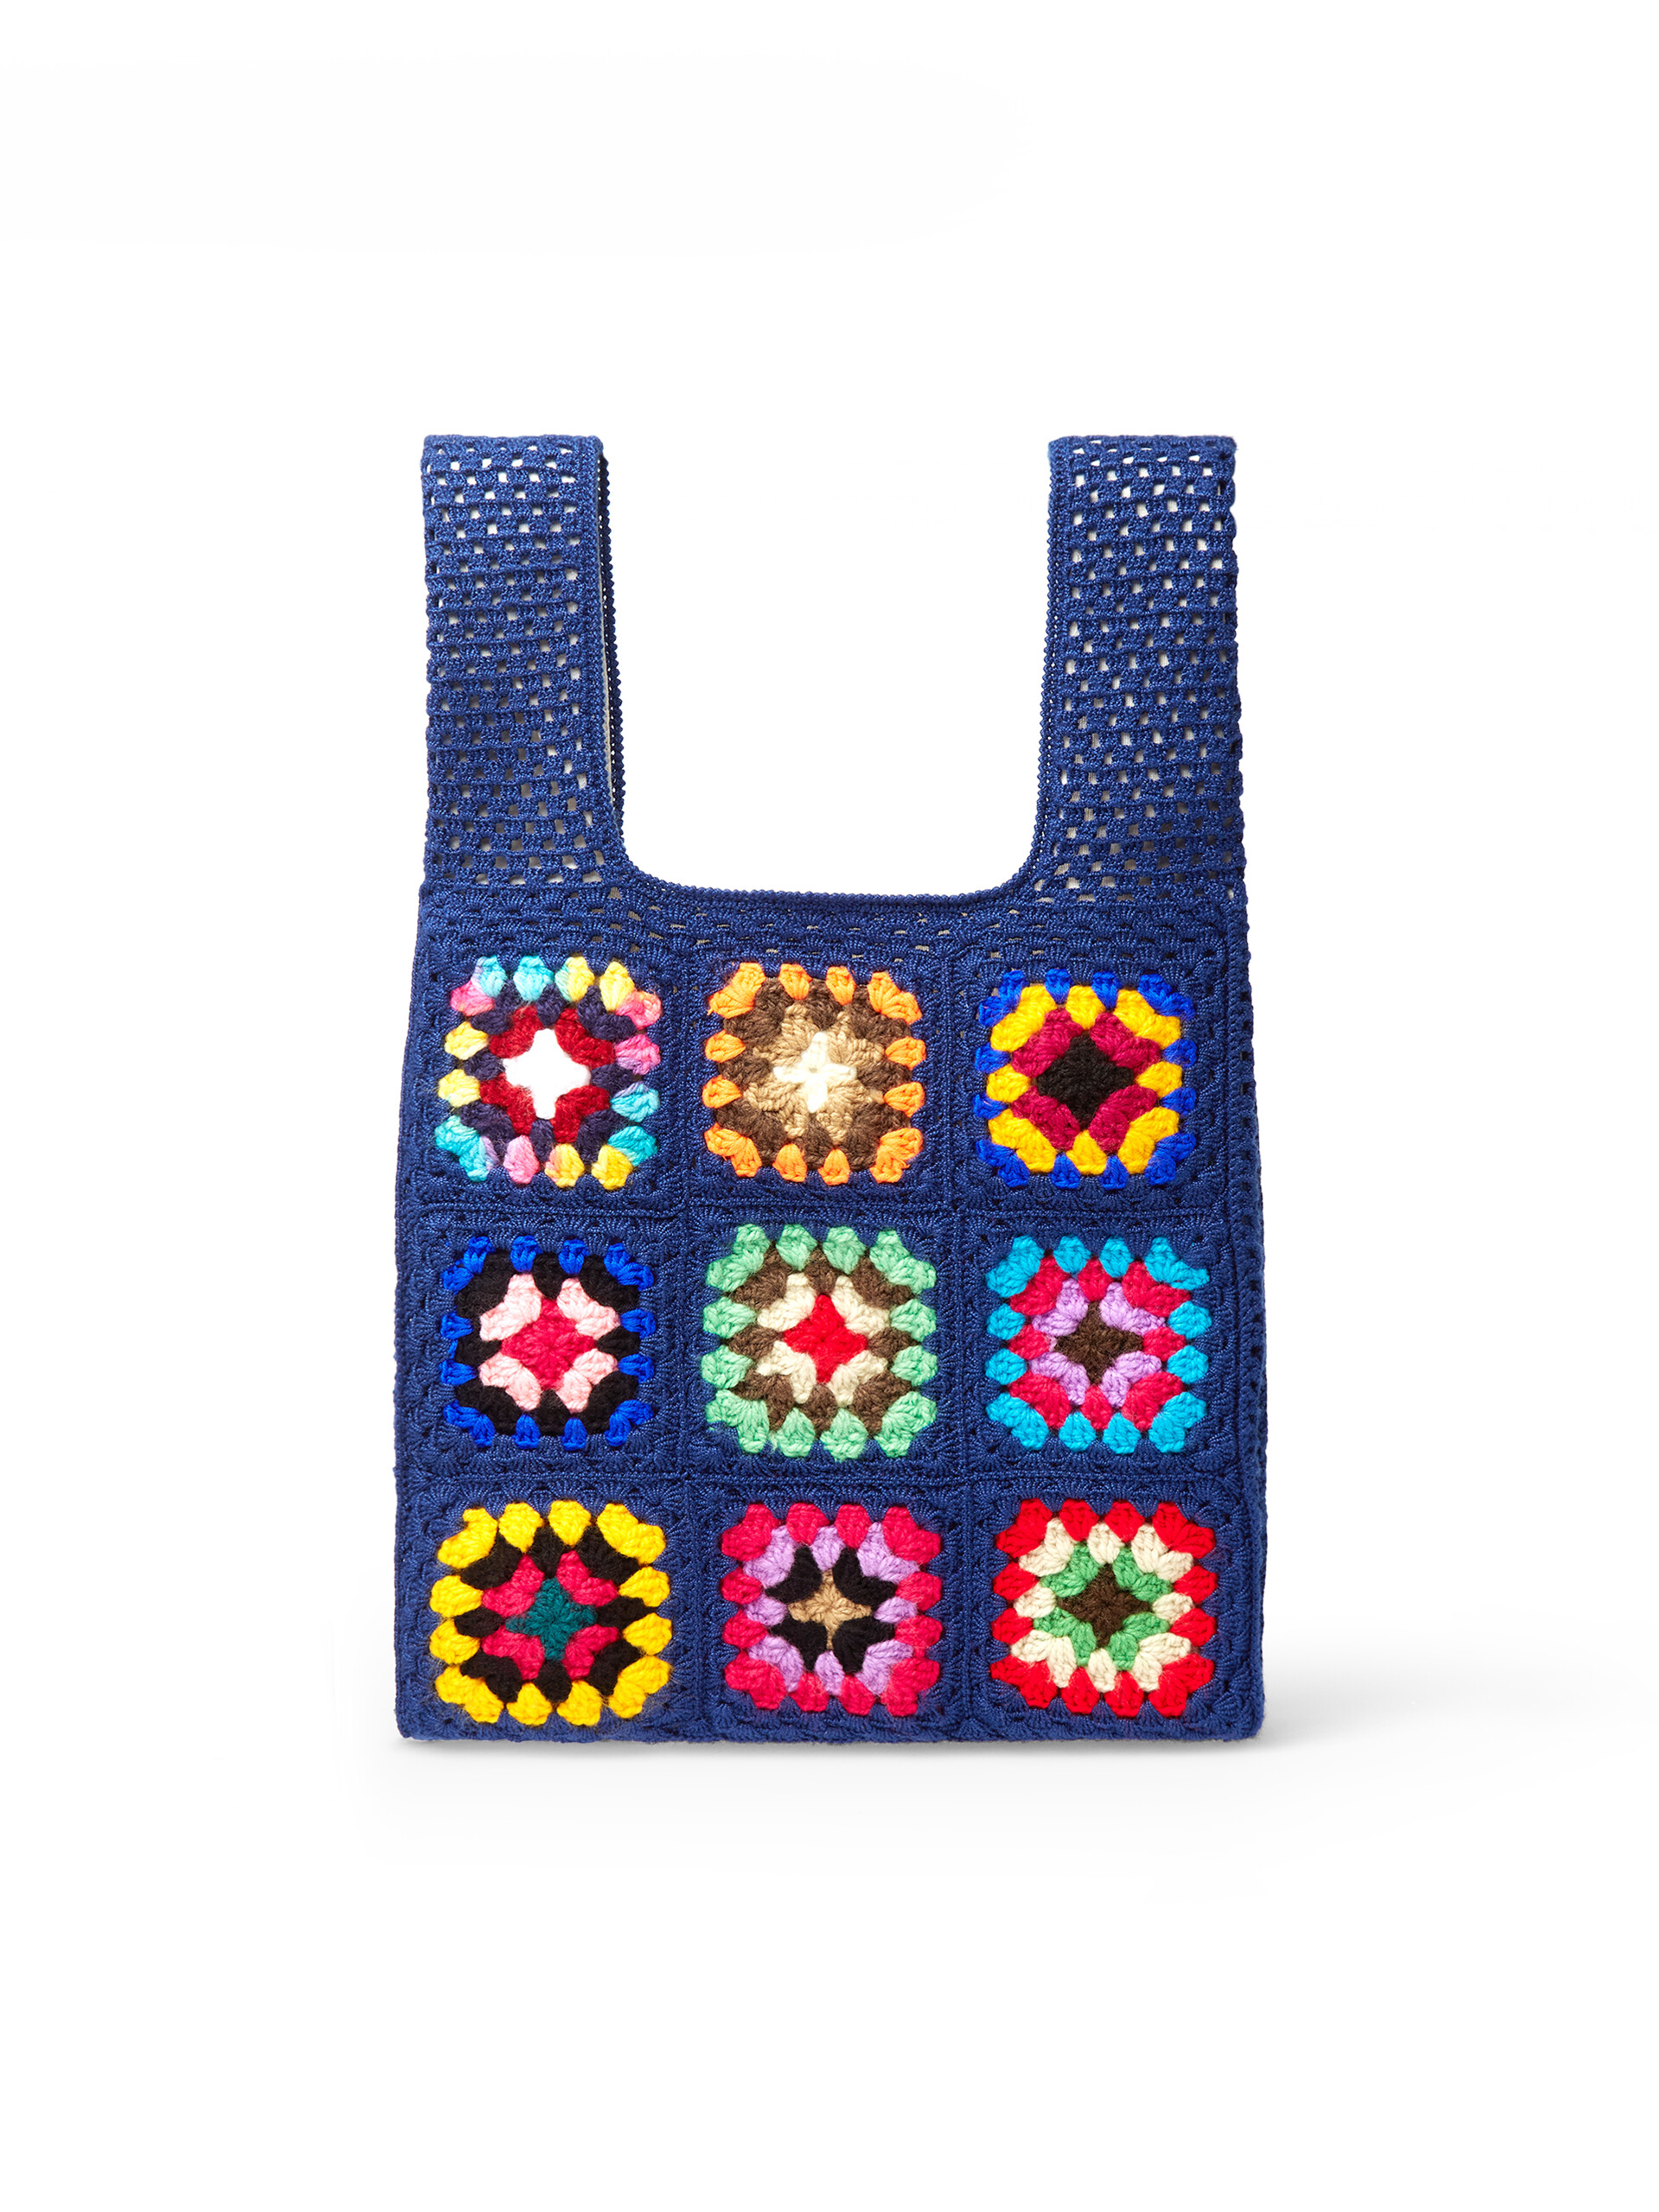 Shopping bag MARNI MARKET with patchwork floral motif in blue crochet polyester - Bags - Image 3